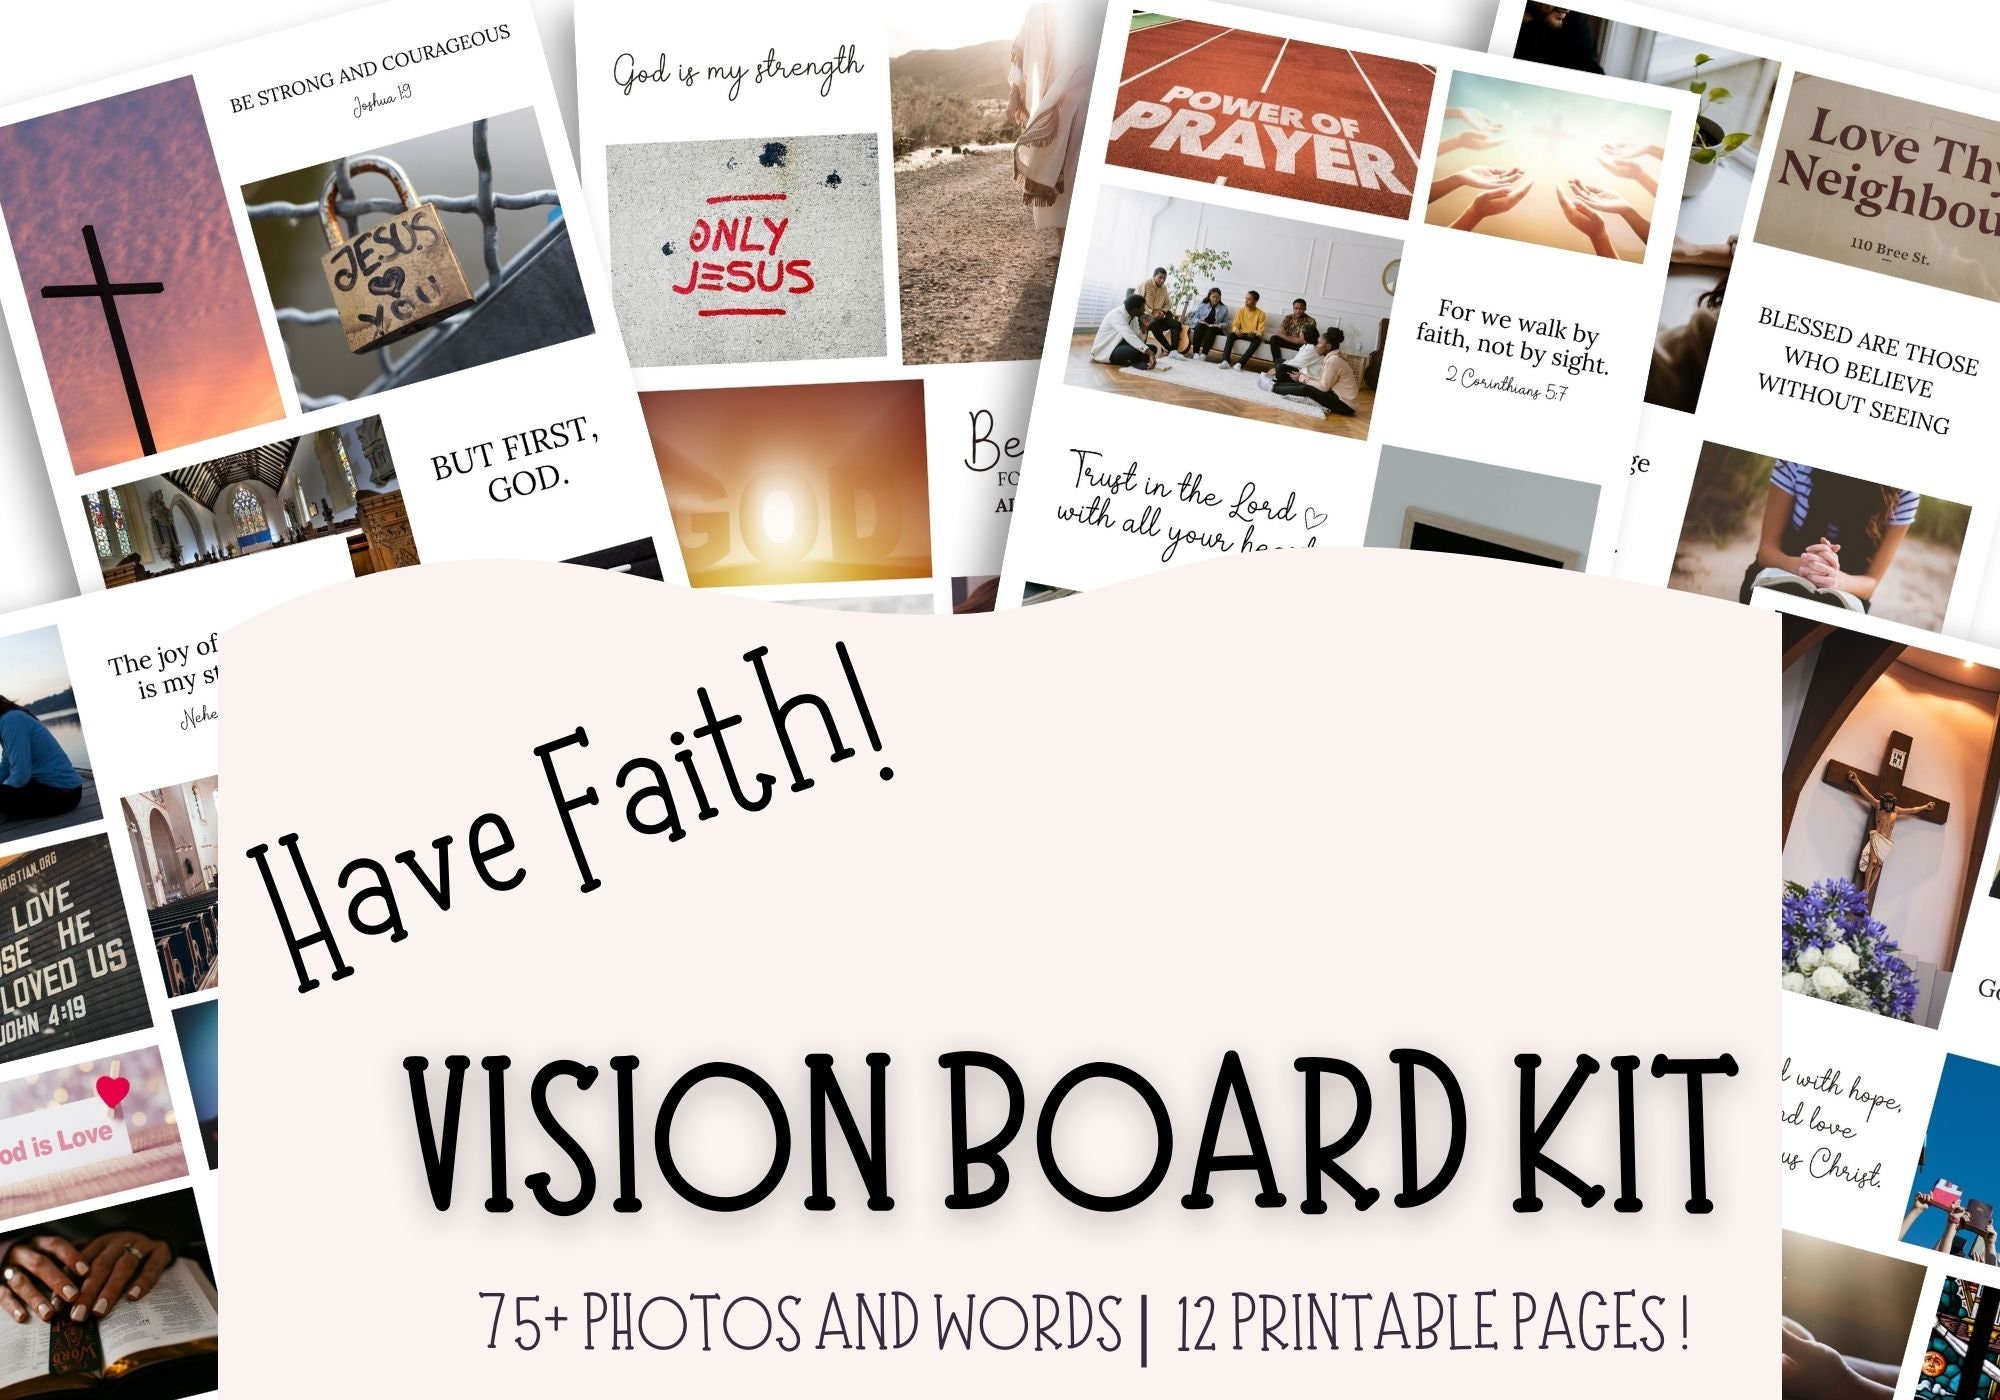 Christian Clip Art Book: Vision Board for Christians with Scriptural Affirmations and Bible Verses | 200+ Pictures, Supplies Kit | Dream Board